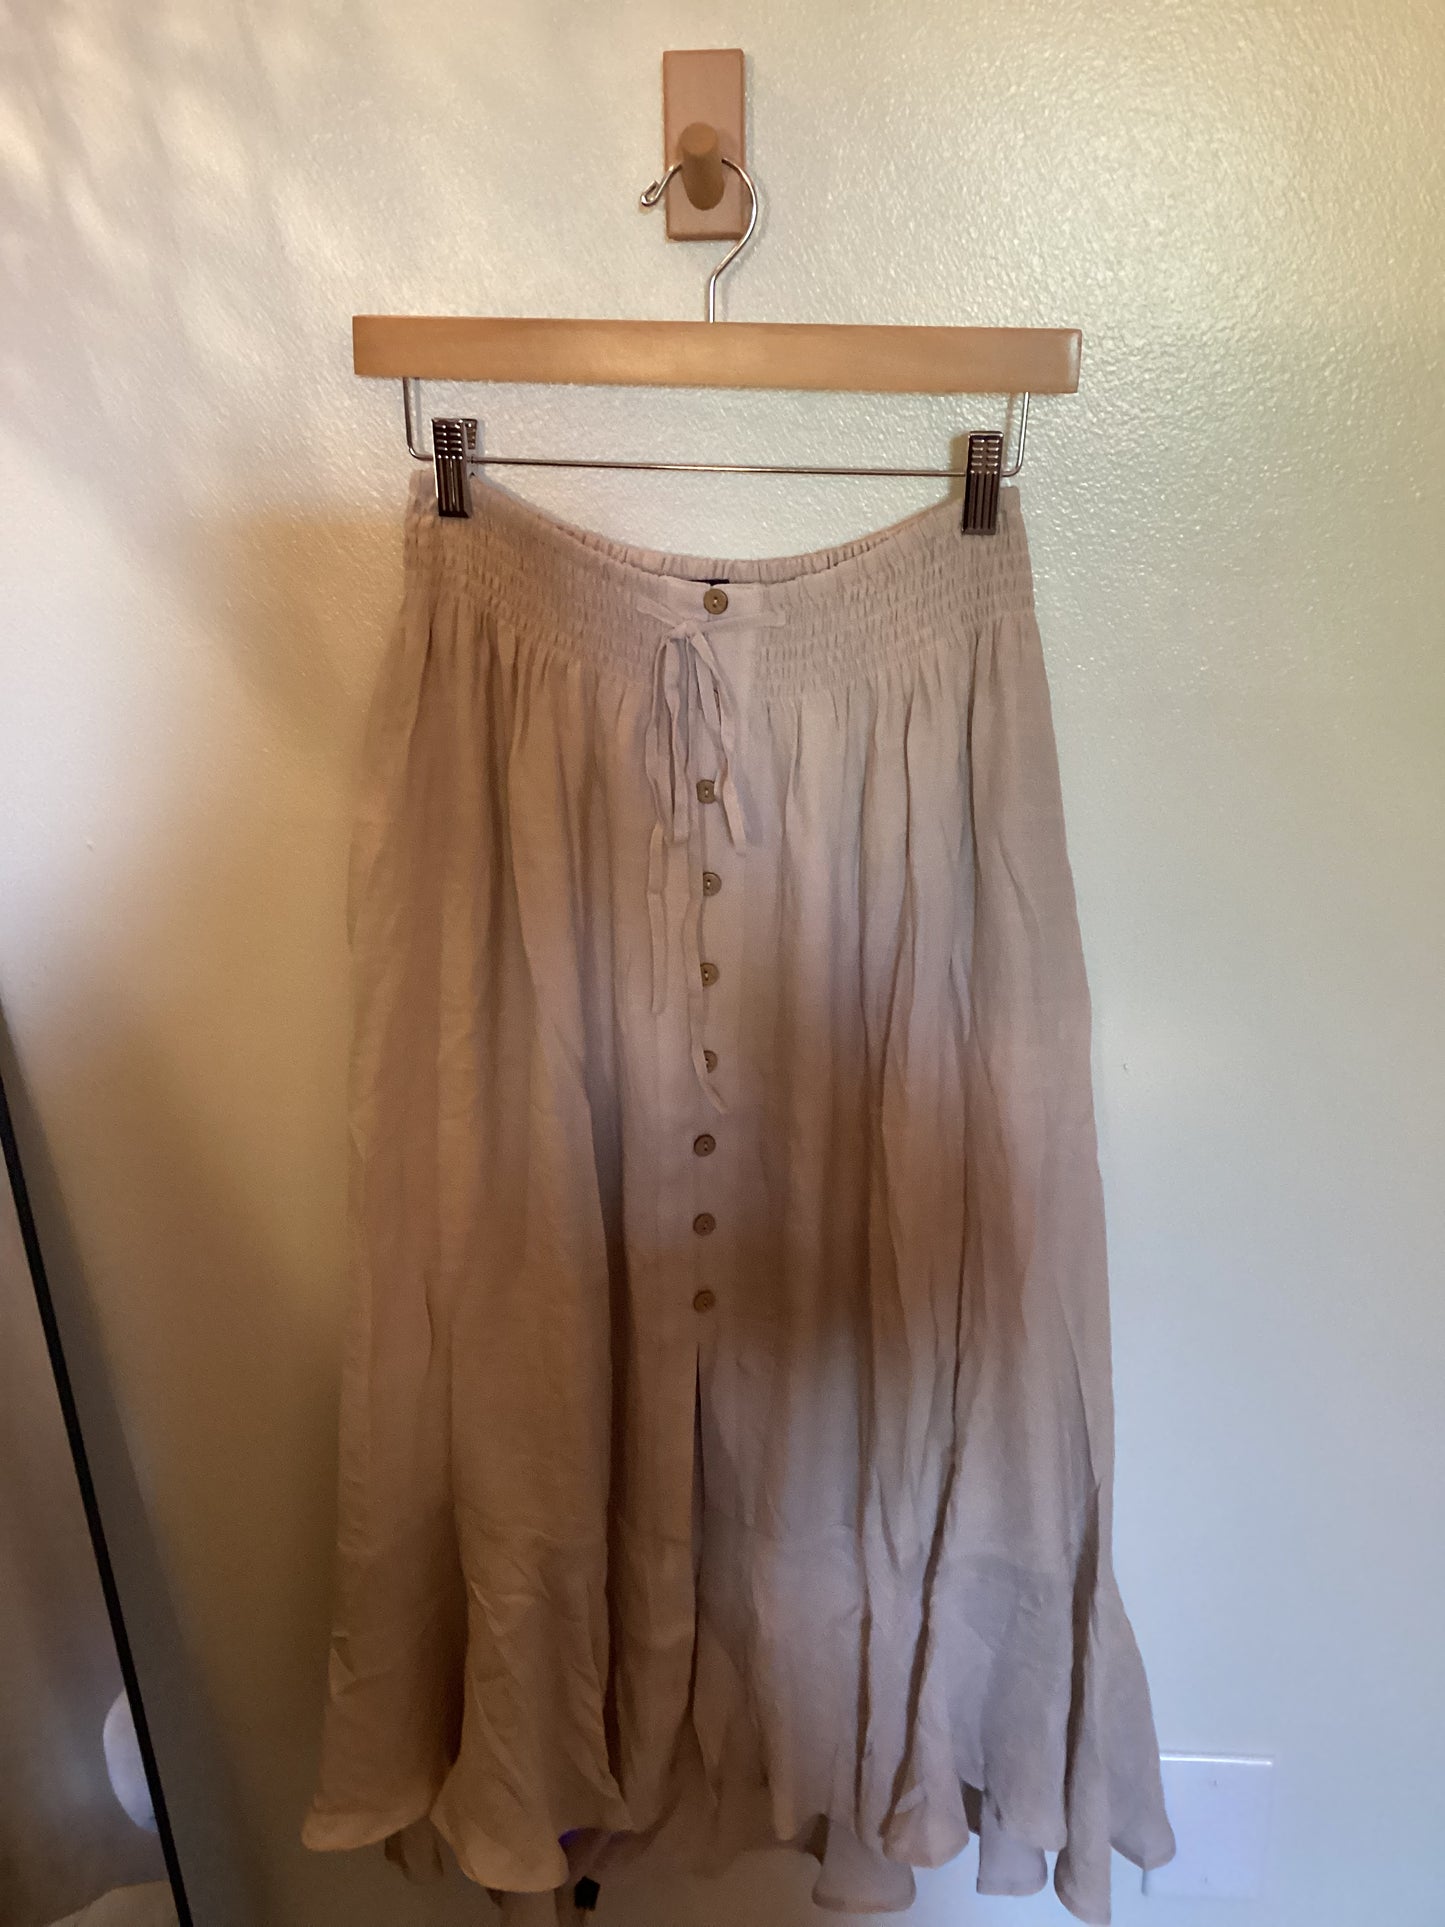 THE skirt in Tan